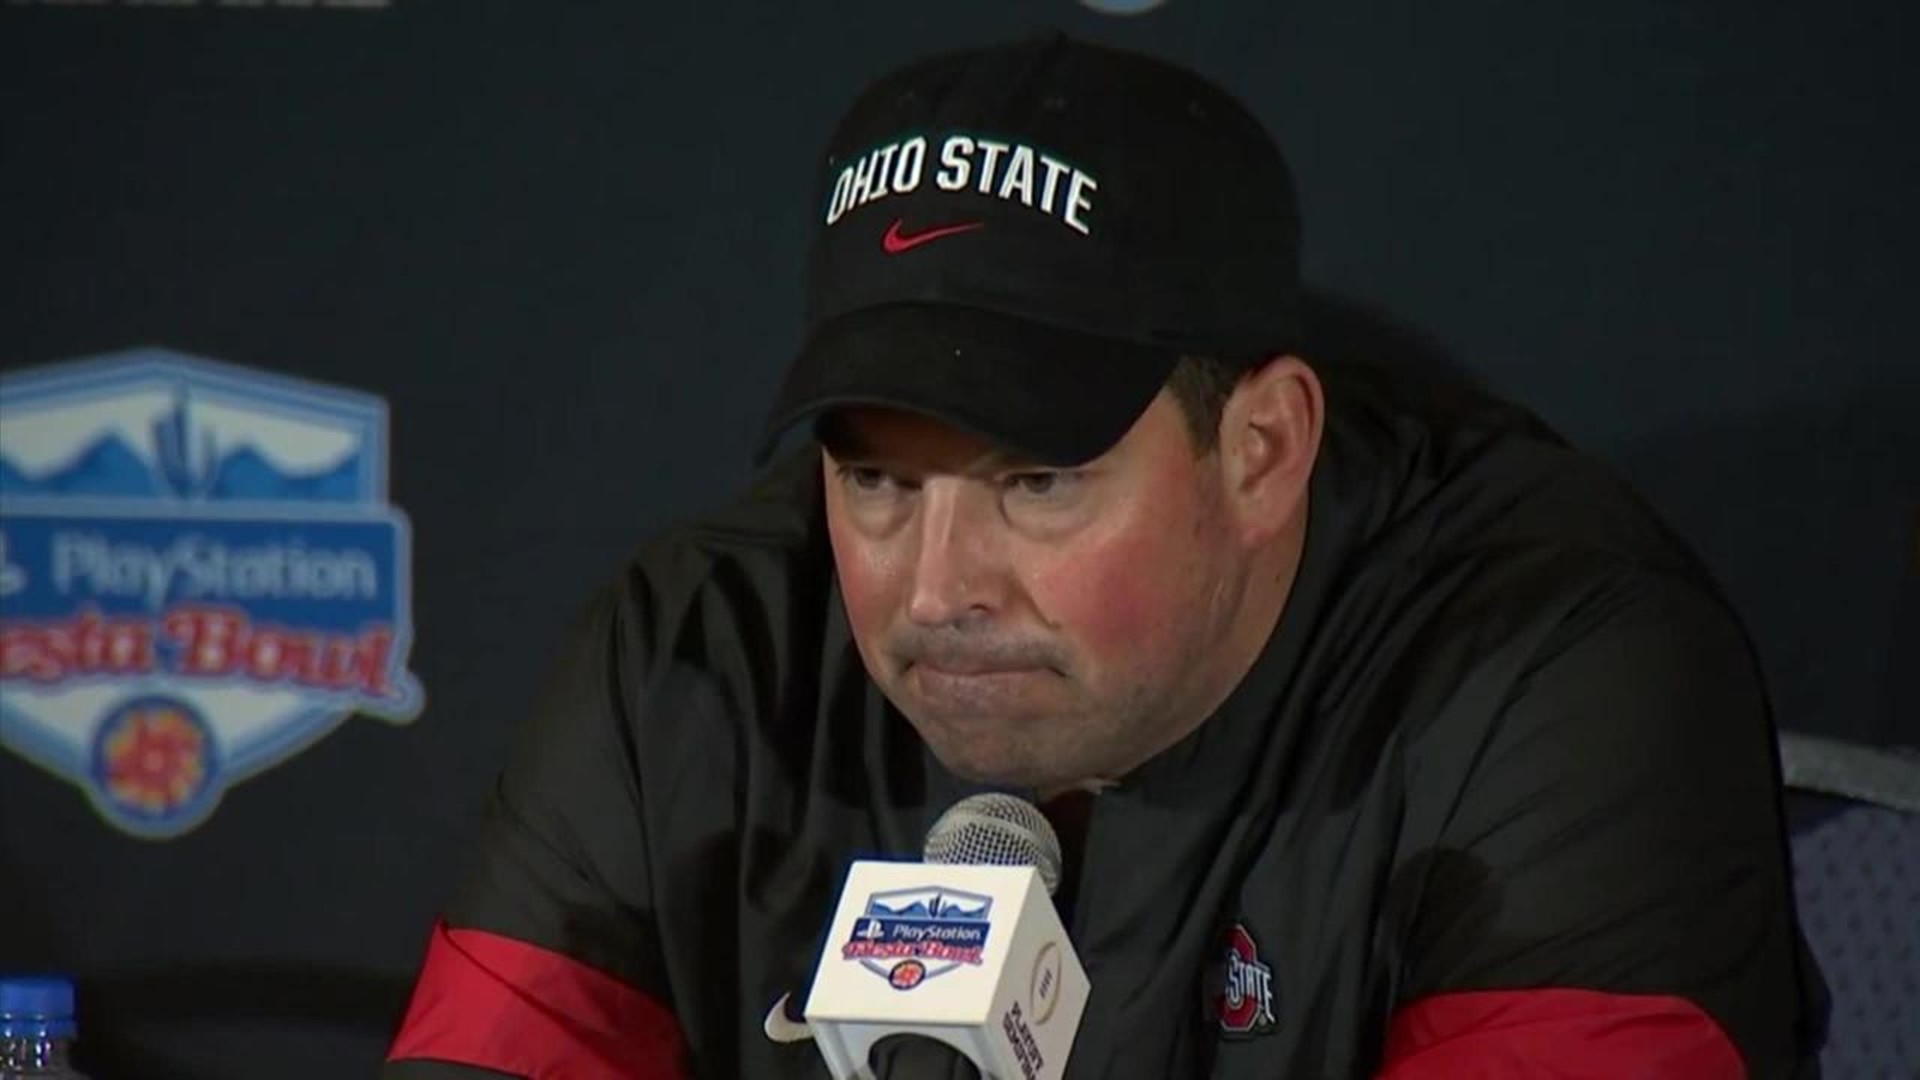 Ohio State head coach discusses his thoughts on the reports that the Big Ten is considering canceling fall sports due to the COVID-19 pandemic.